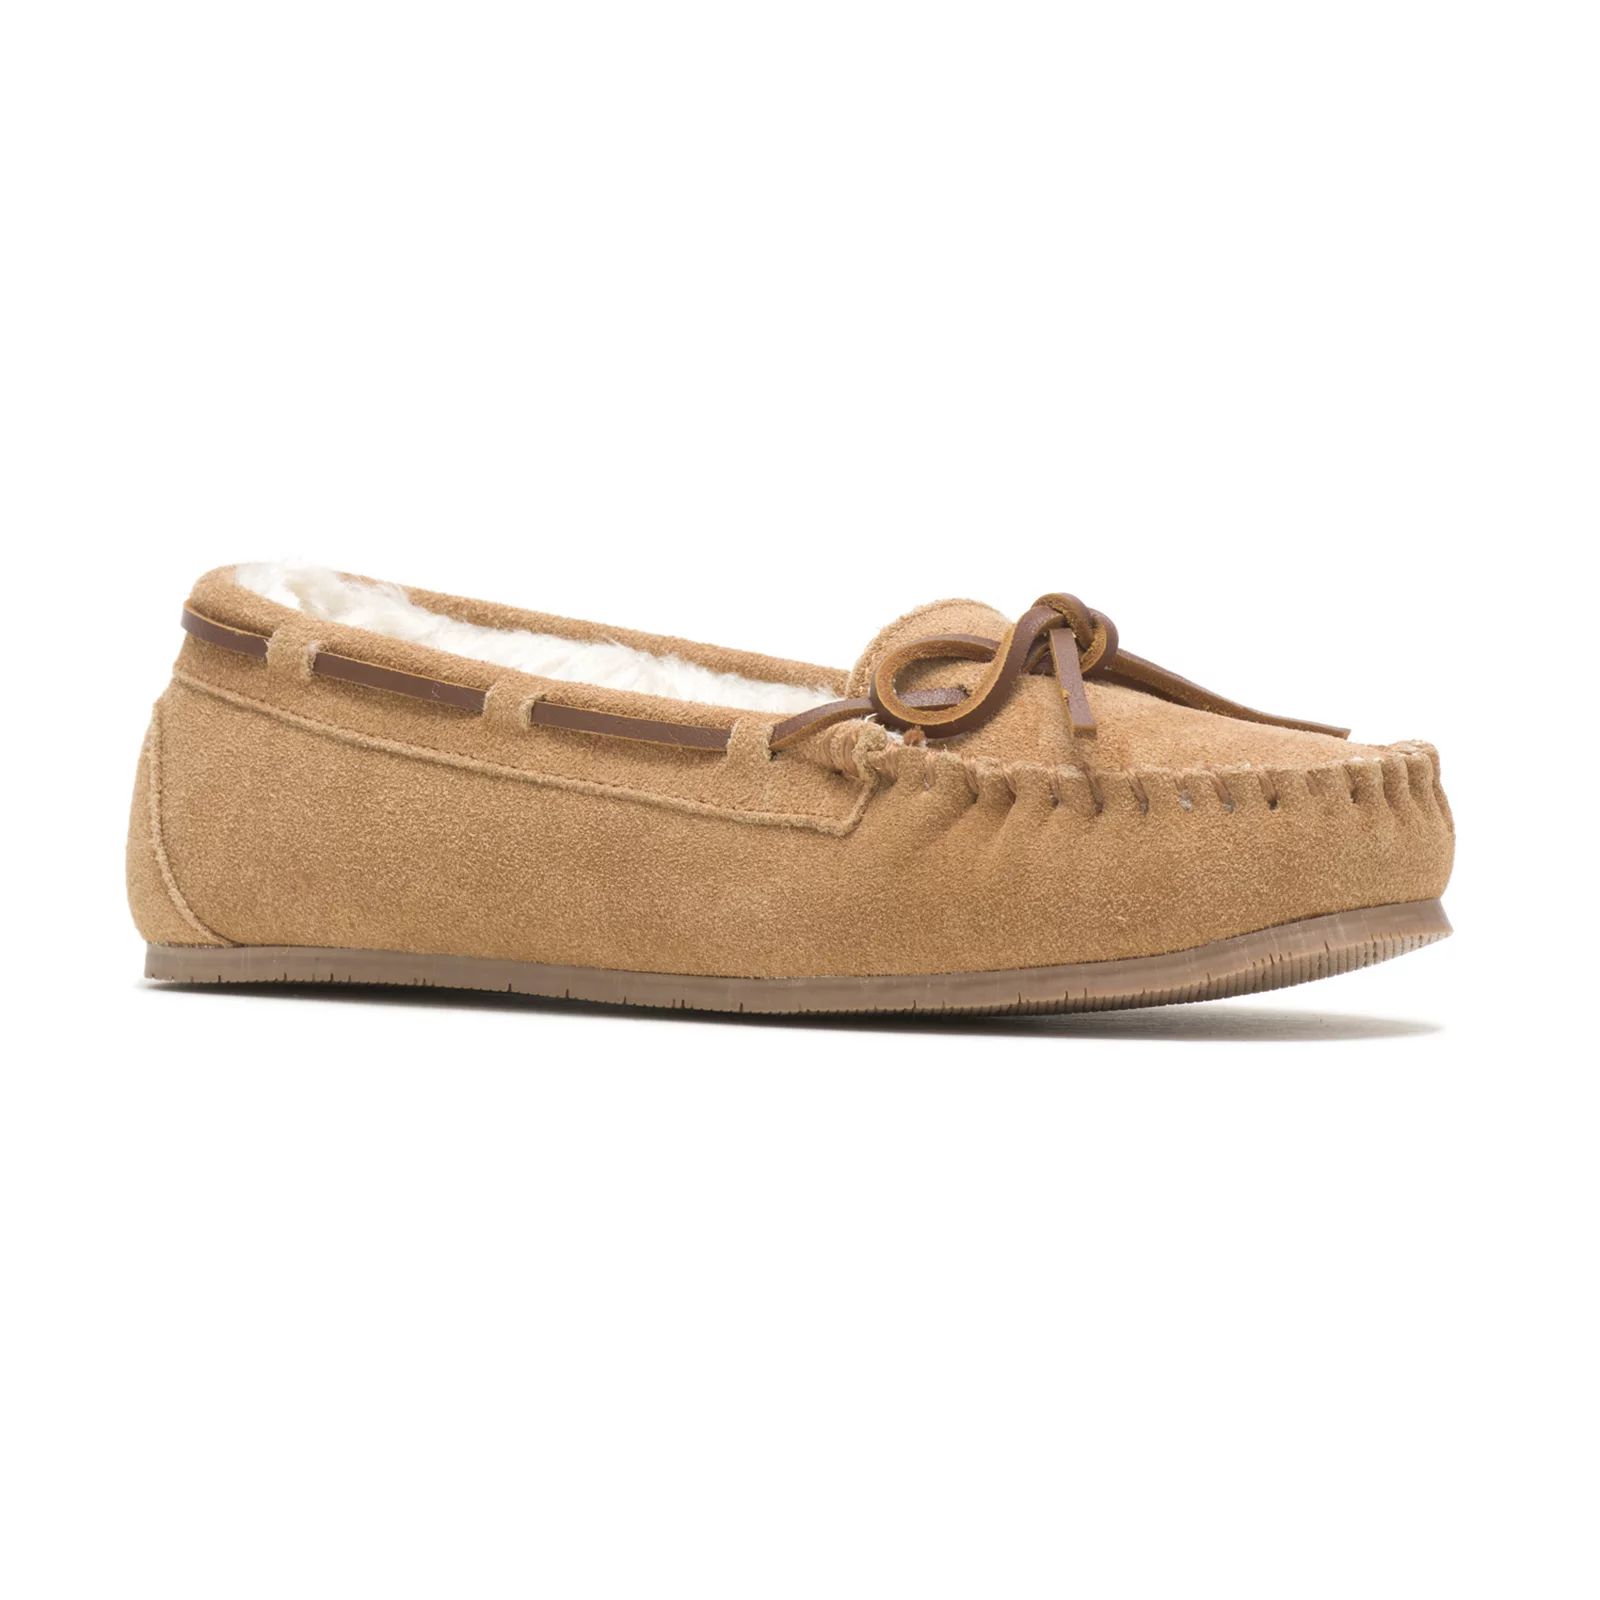 Hush Puppies Zoe Women's Suede Moccasin Slippers, Size: 9, Lt Brown | Kohl's